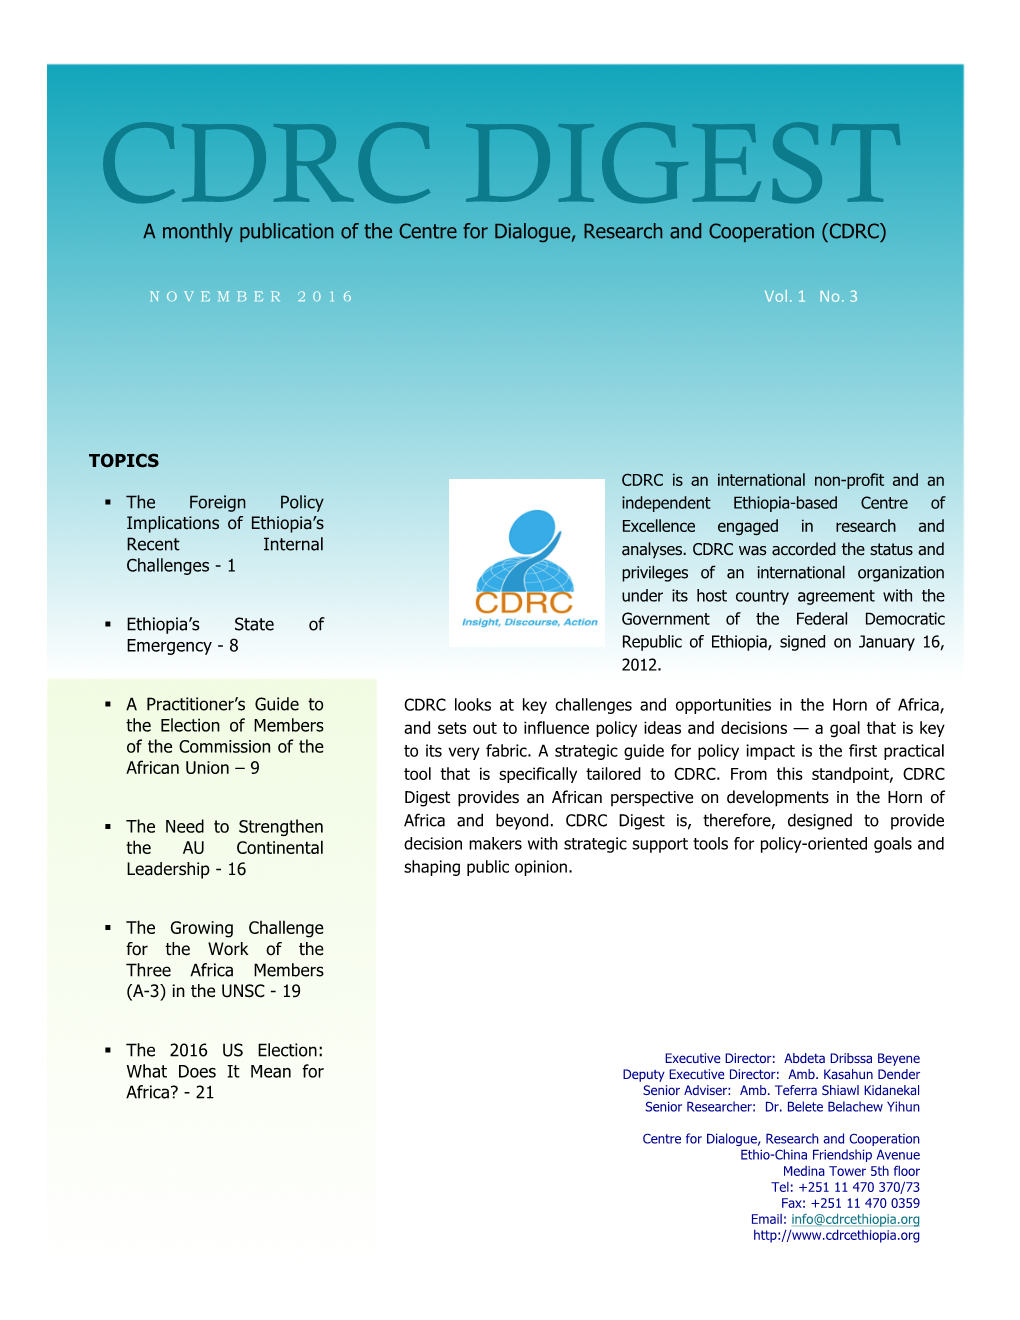 CDRC Digest Provides an African Perspective on Developments in the Horn of § the Need to Strengthen Africa and Beyond